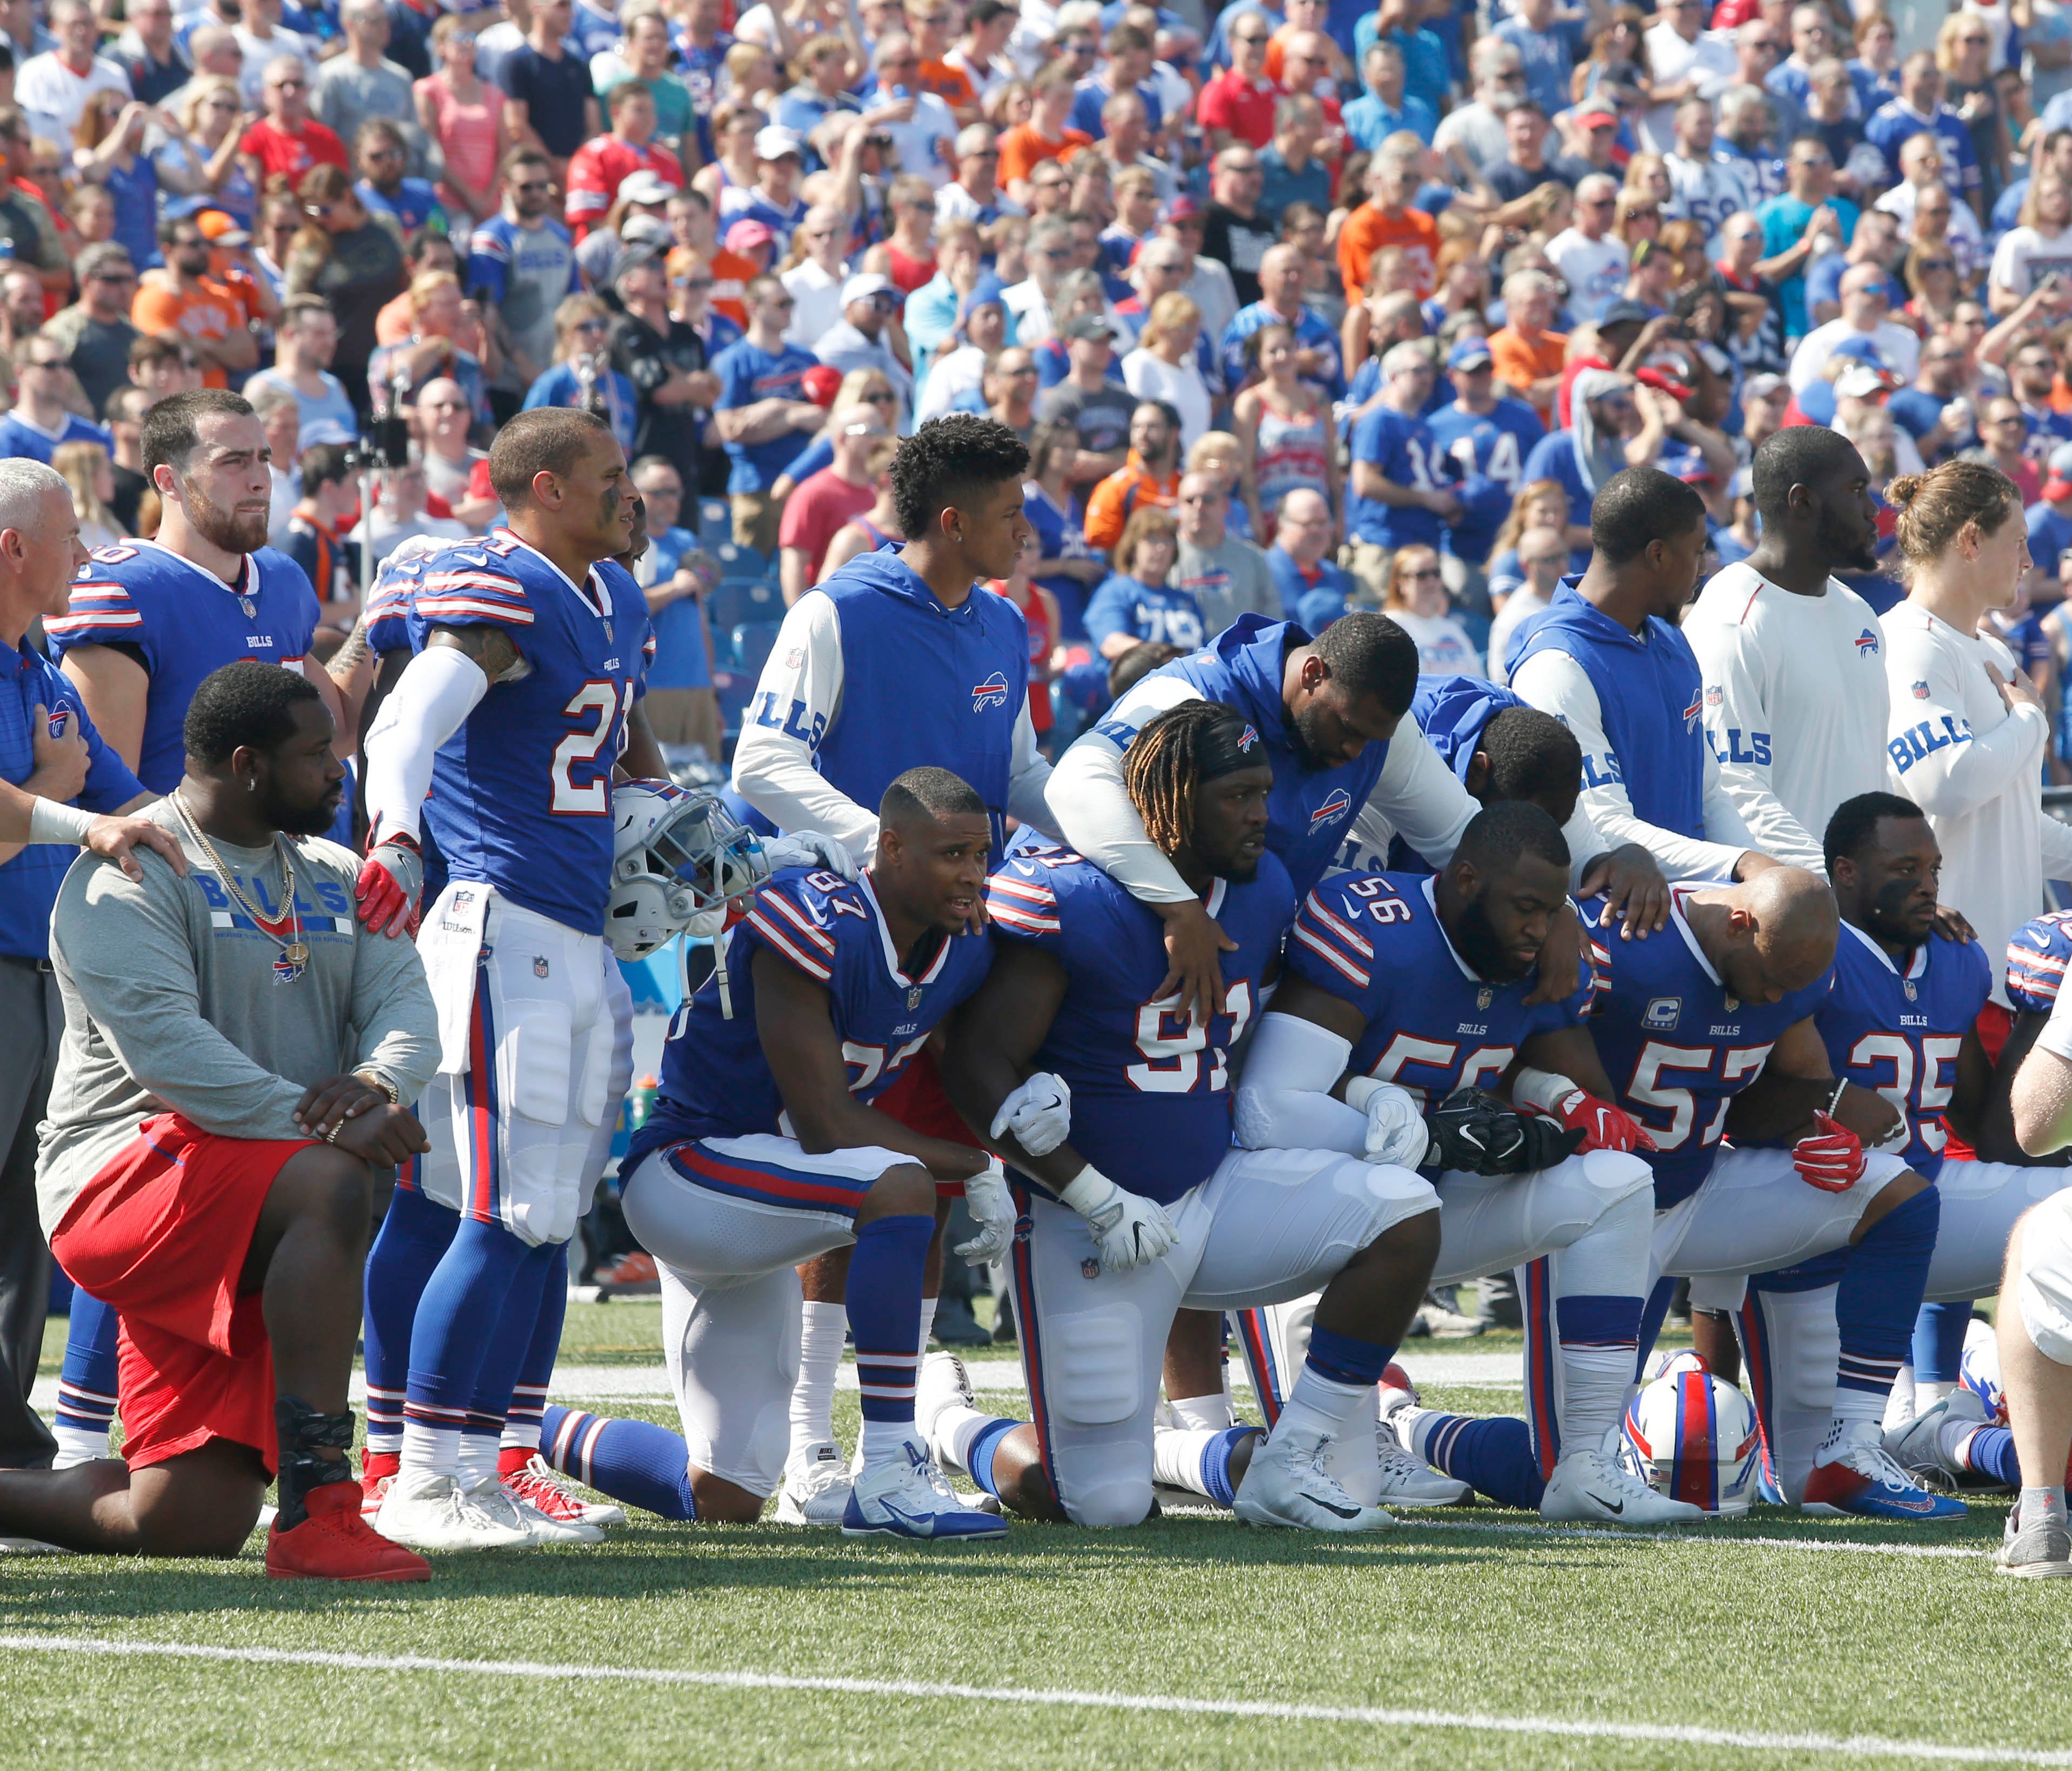 Buffalo Bills players kneel in protest during the National Anthem before a game against the Denver Broncos at New Era Field.